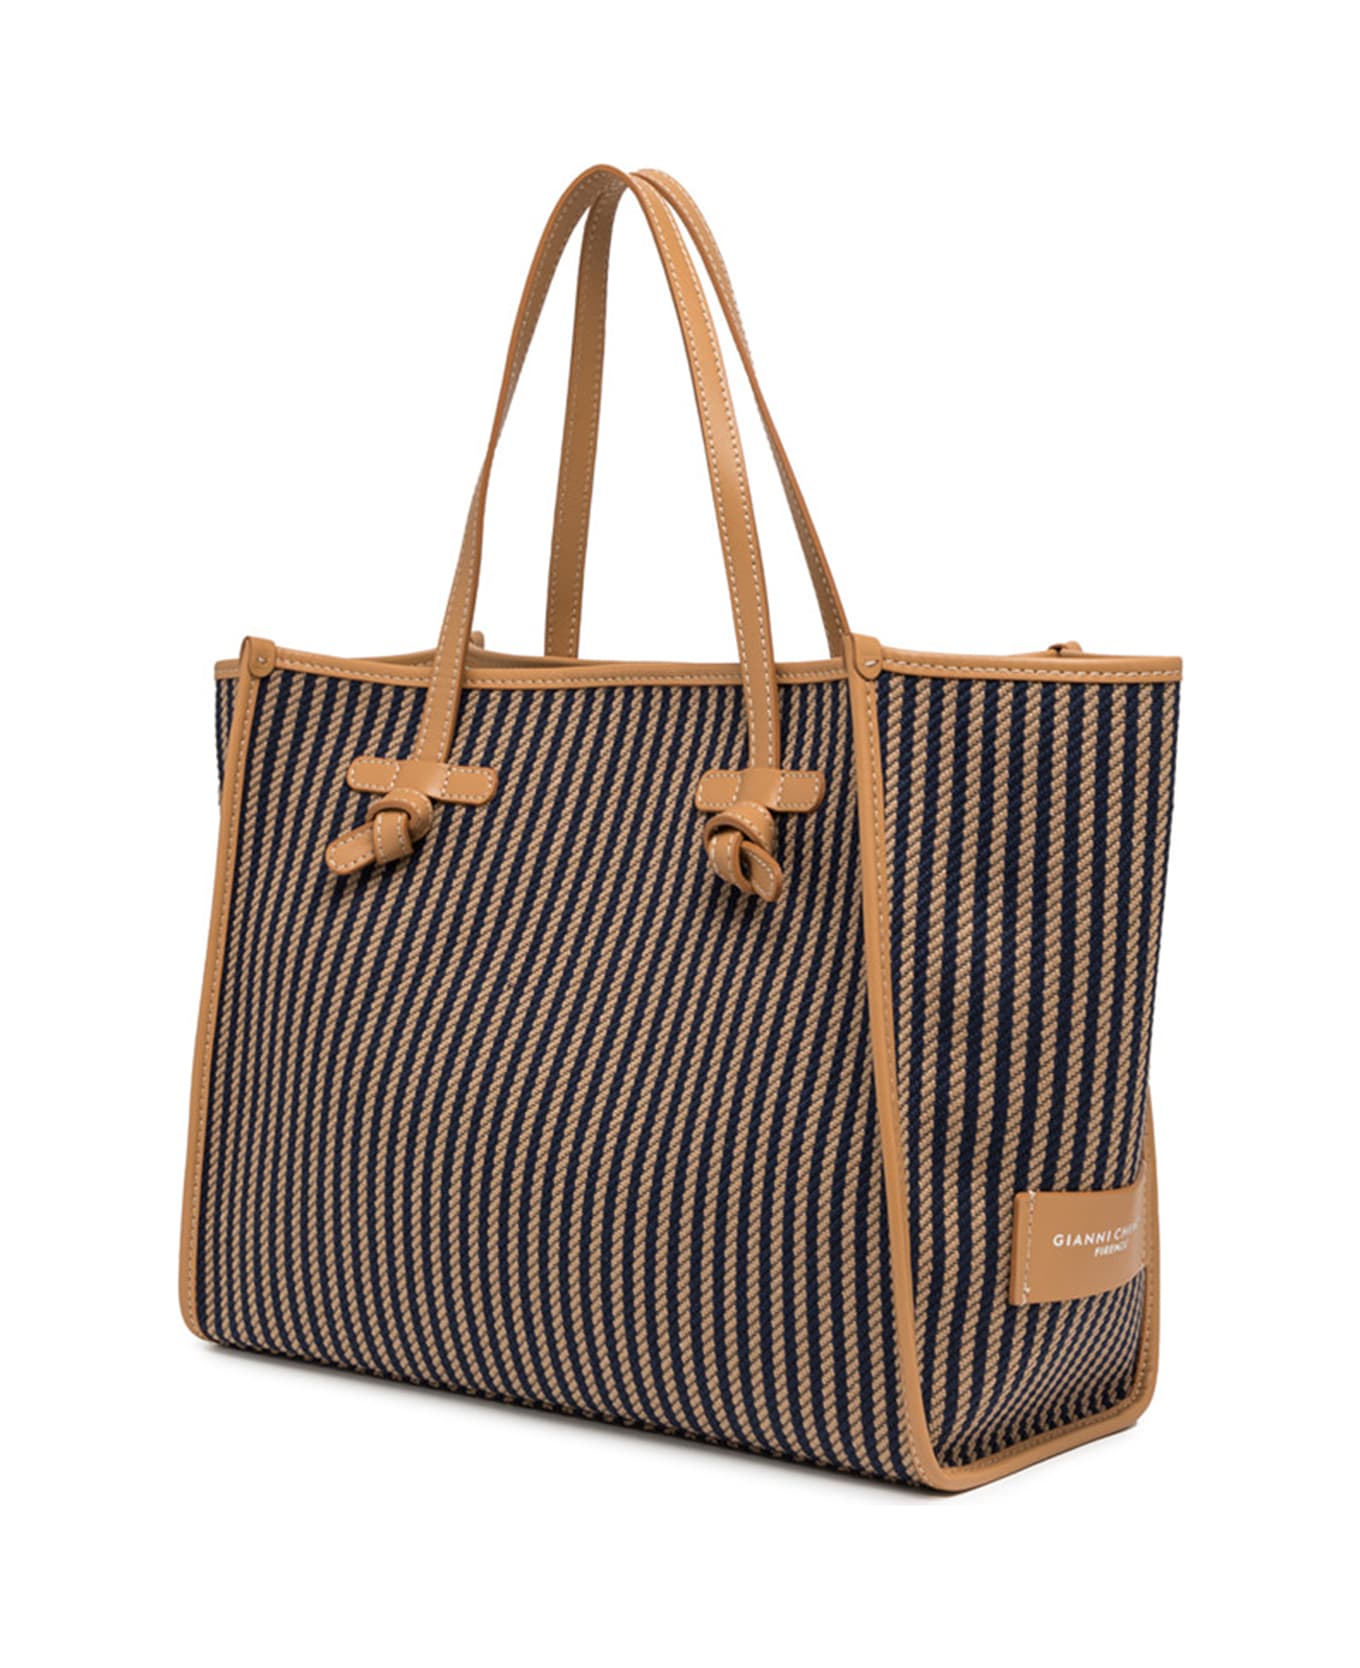 Gianni Chiarini Marcella Shopping Bag In Canvas With Striped Pattern - VAR.NAVY